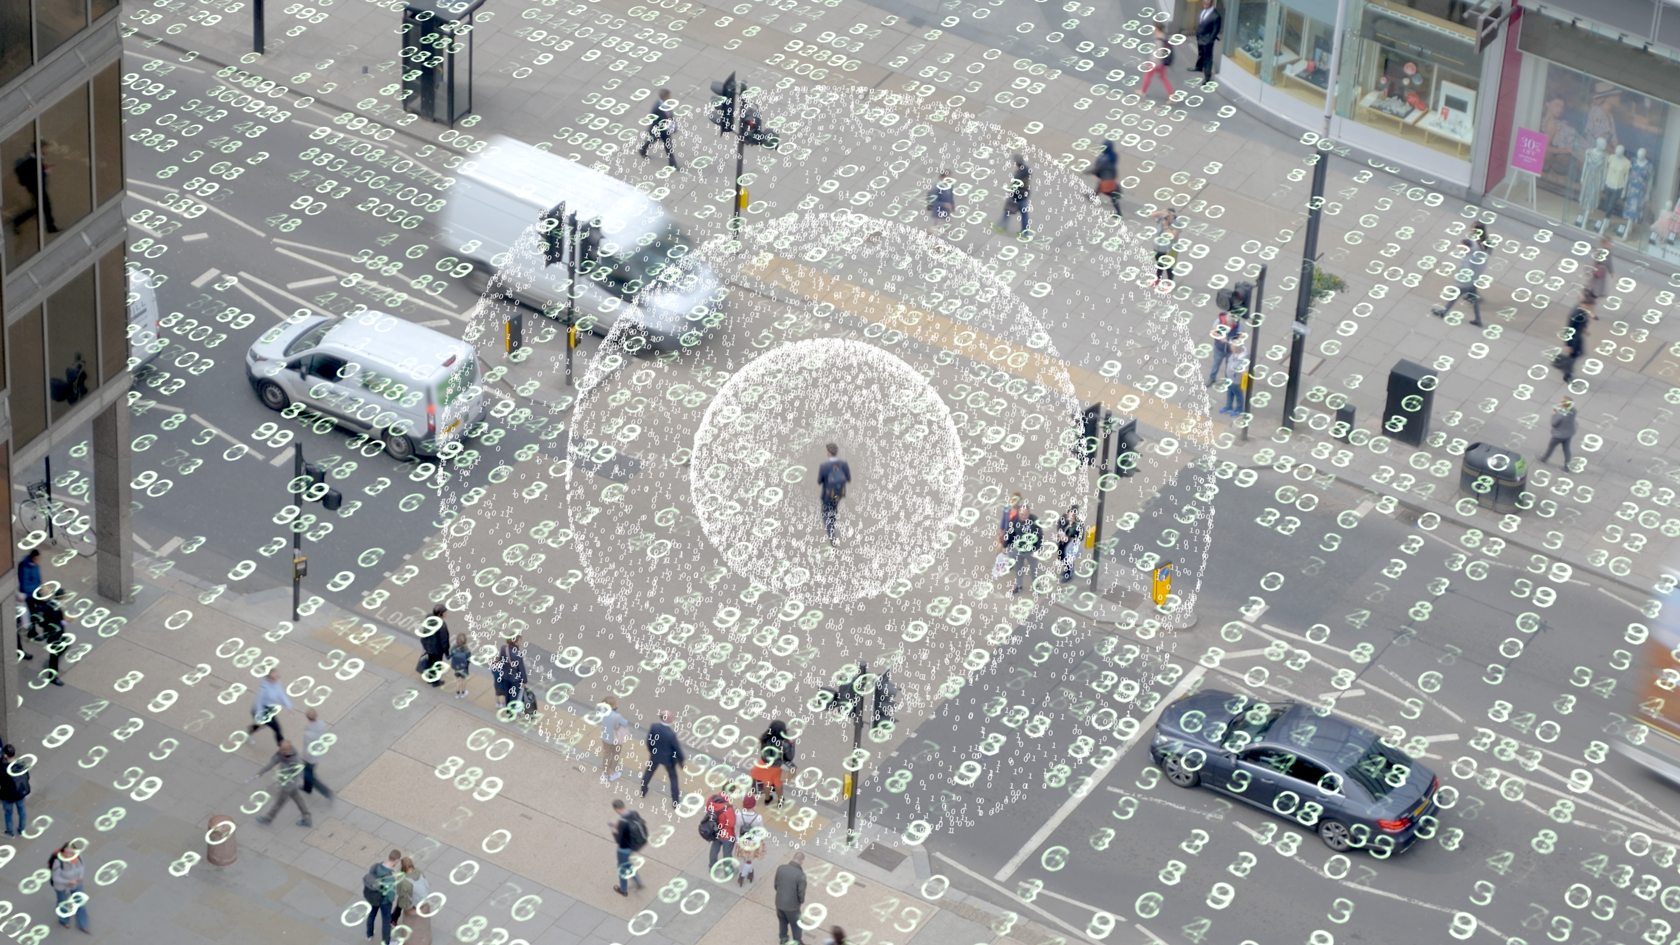 Technology illustration of how data follows people. Rows of numbers surround a man walking down the street.